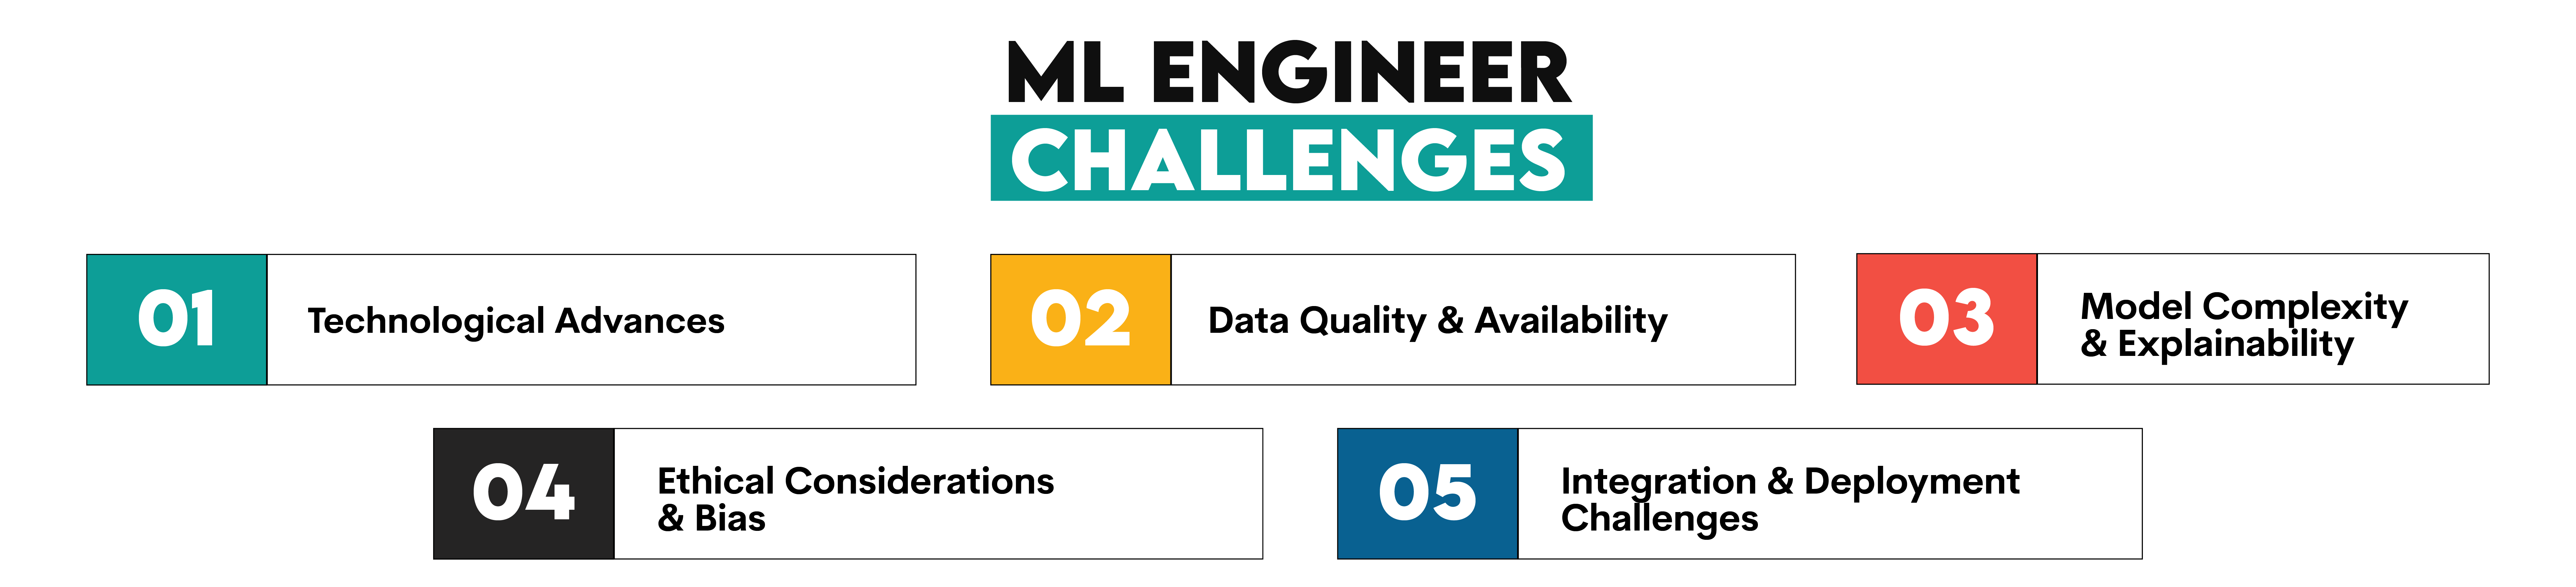 Challenges in the Career of Machine Learning Engineers